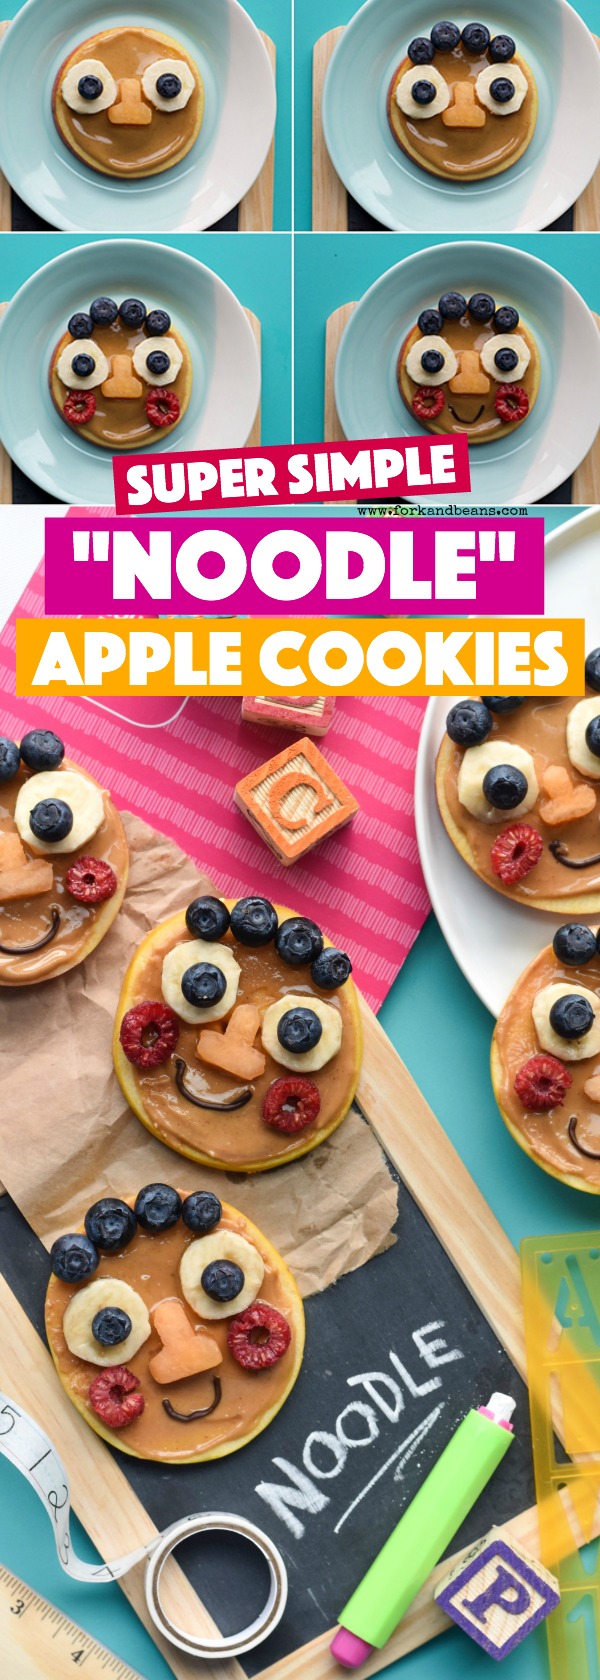 A plate of sliced apples slathered with peanut butter and fruit to look like Noodle from Super Simple. 